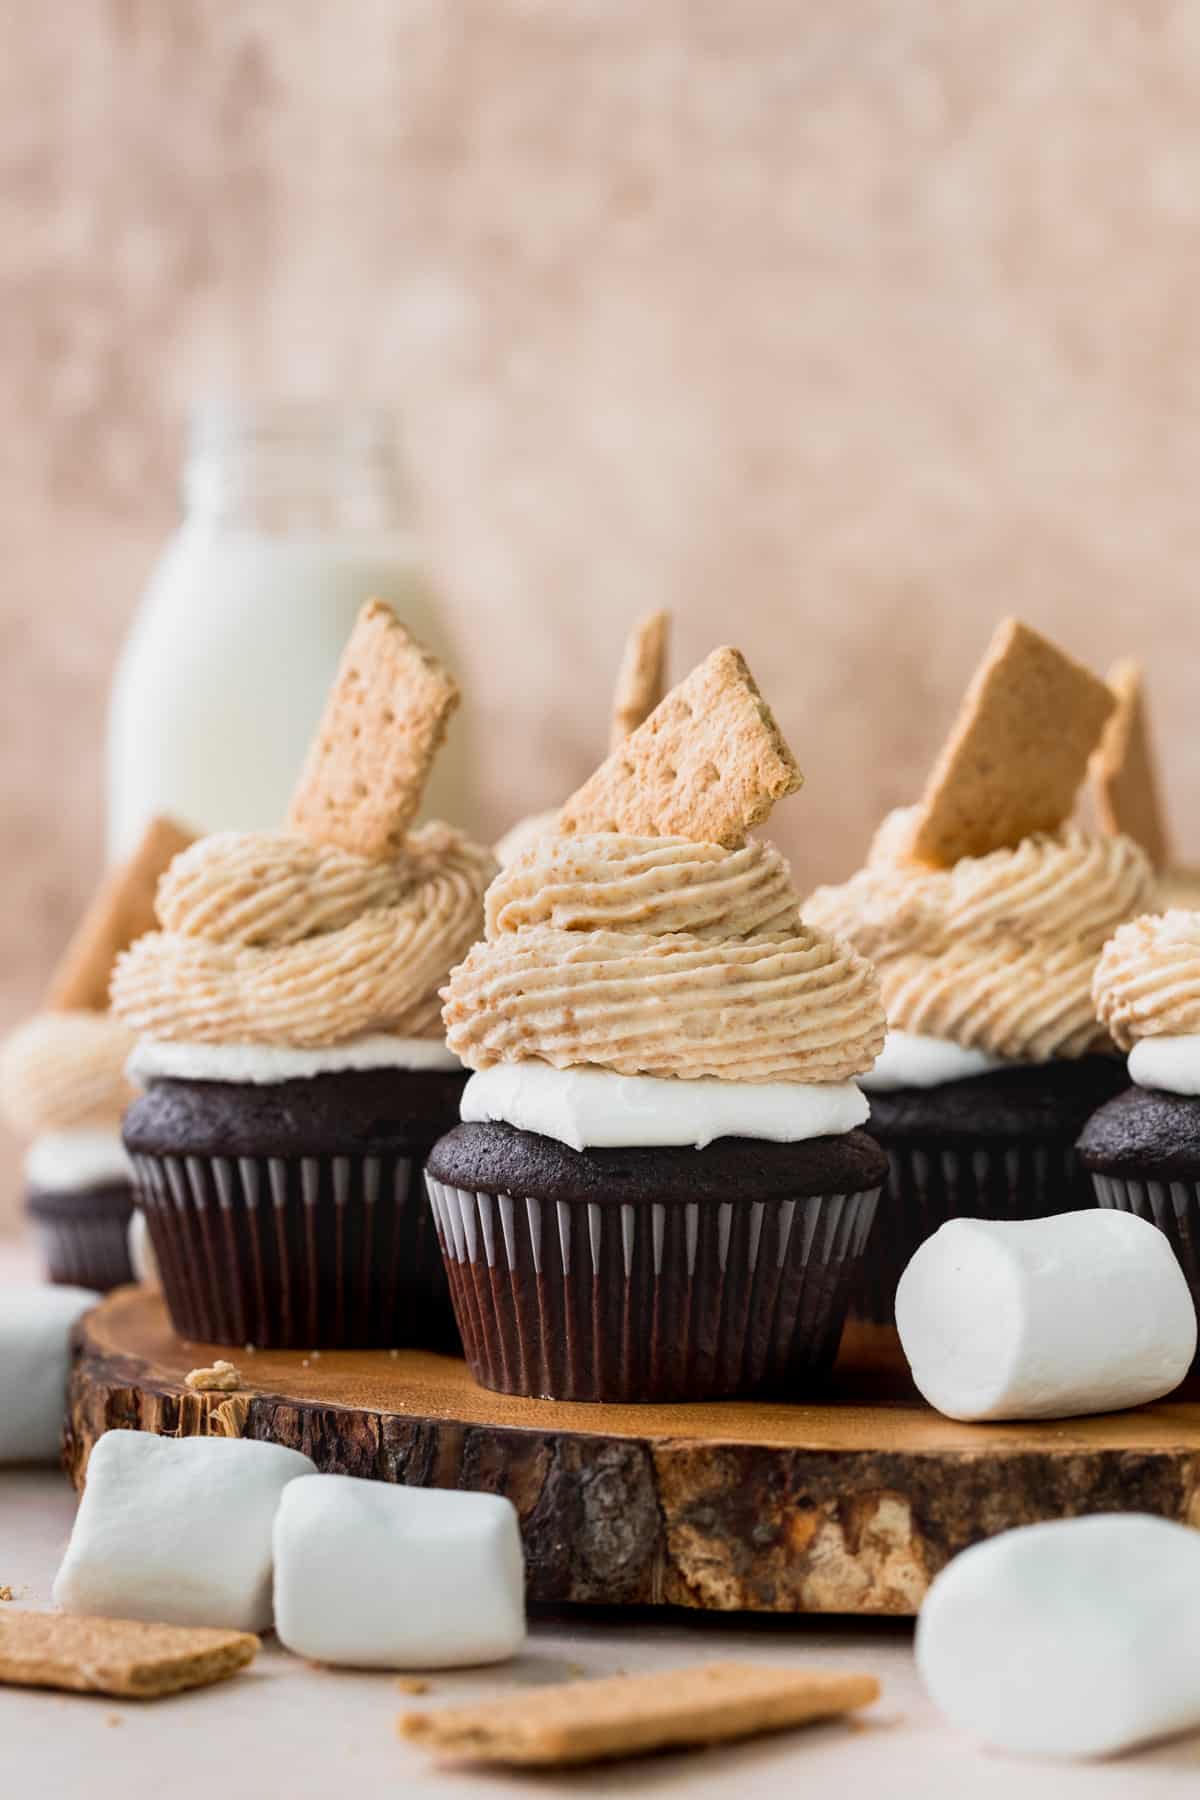 S'mores cupcakes on top of a wooden board.